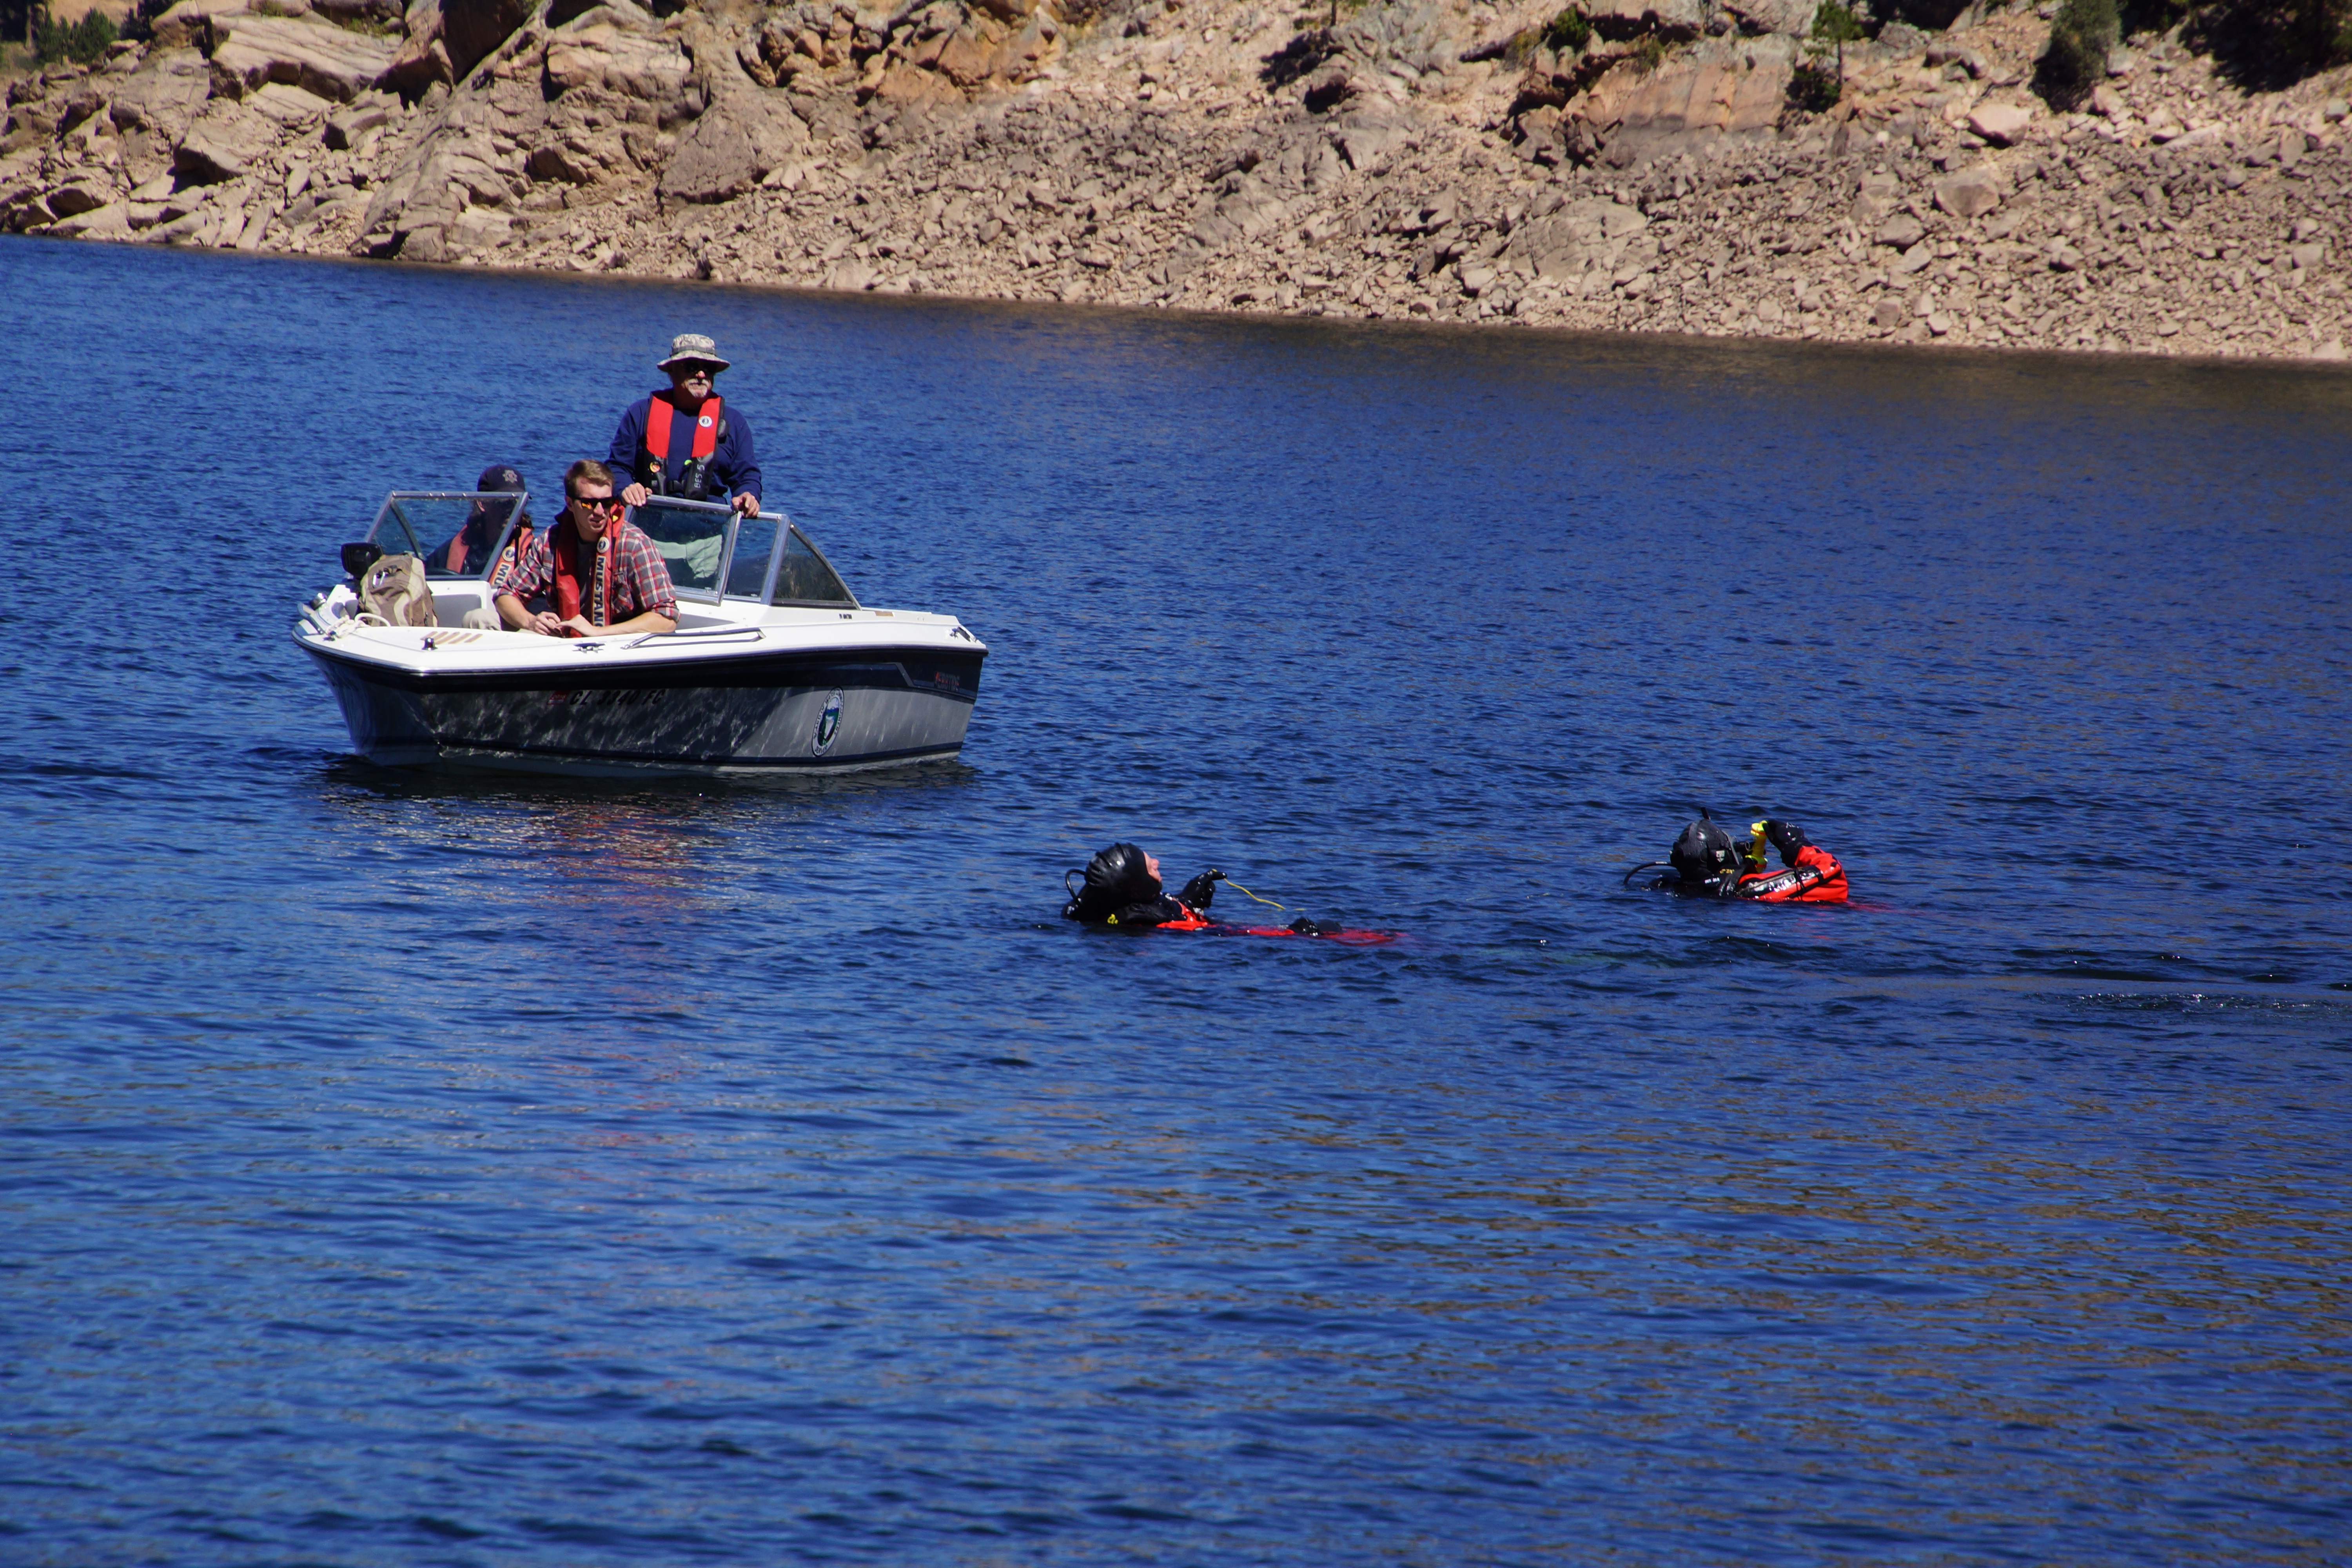 The Boulder Emergency Squad technical dive team trained at Gross Reservoir on Sept. 10, 2016.